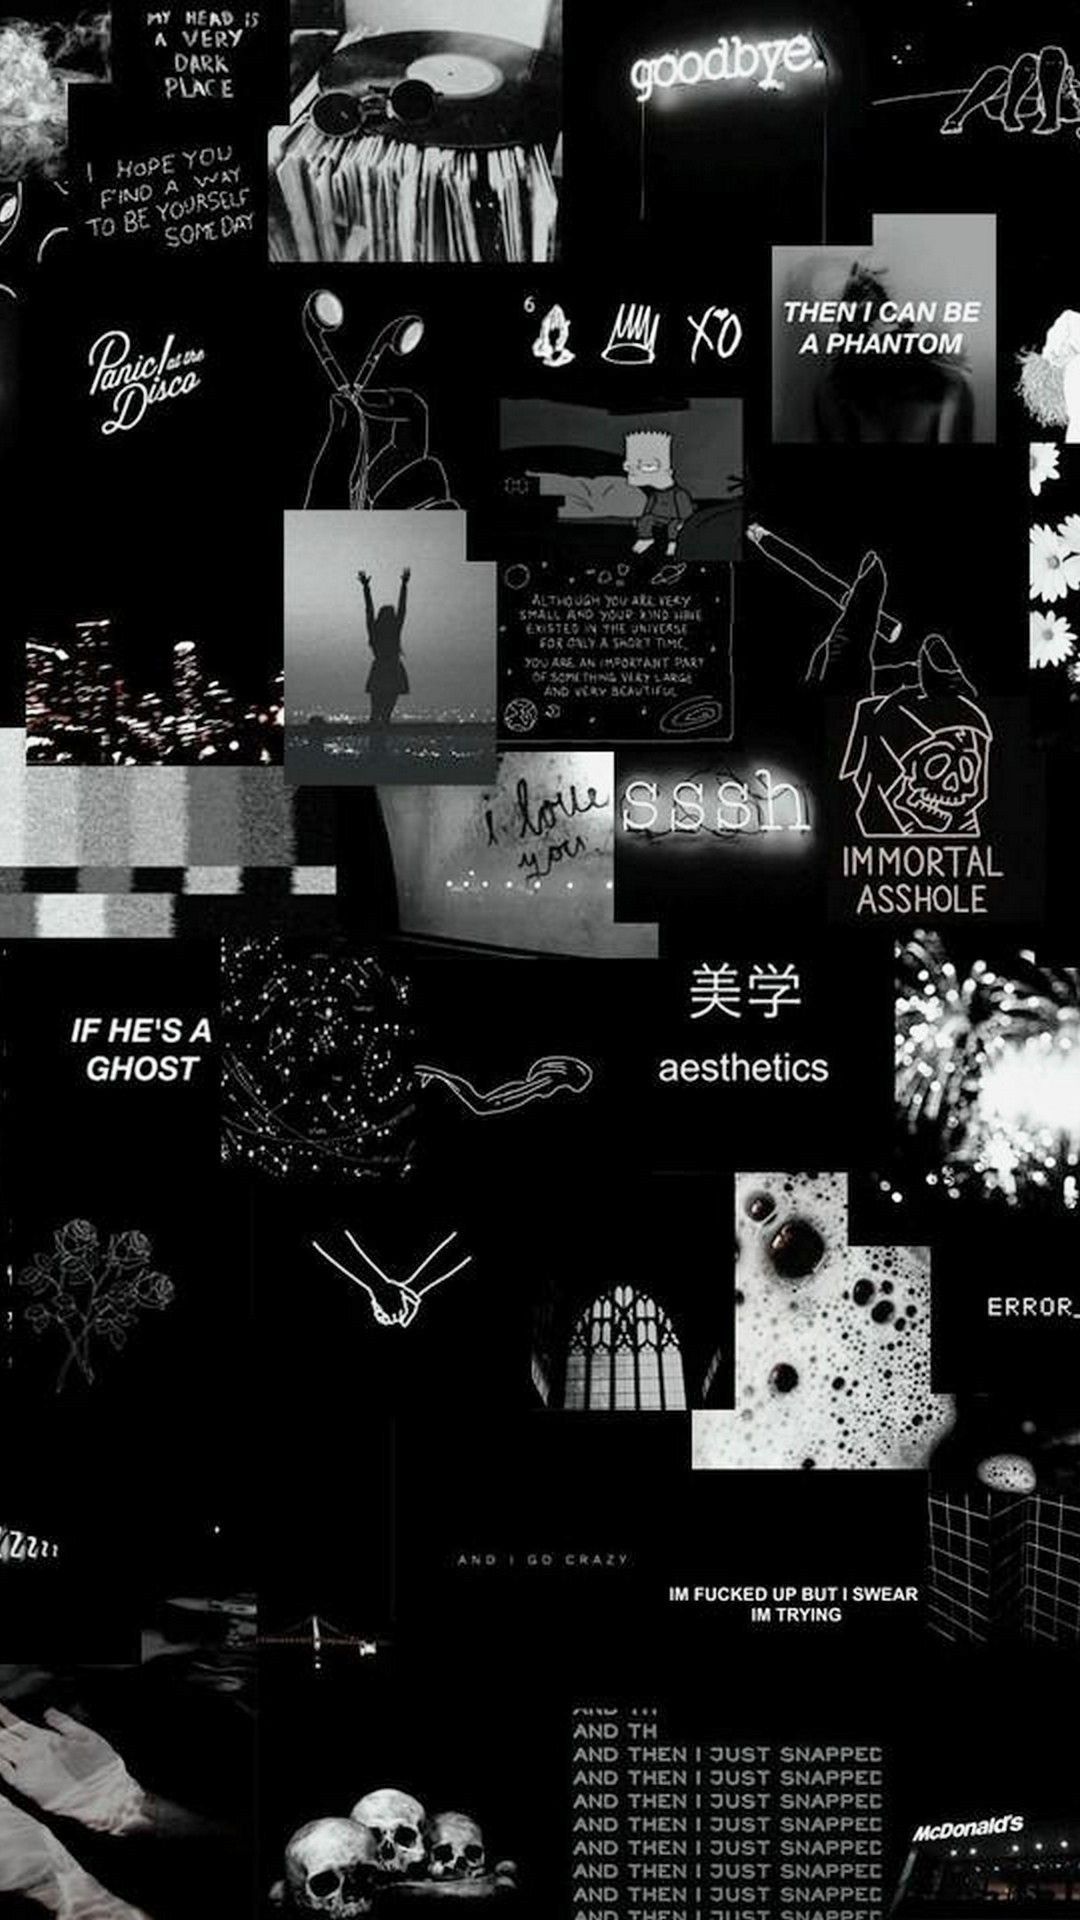 Black and white wallpaper with various images - Black, ghost, HD, black phone